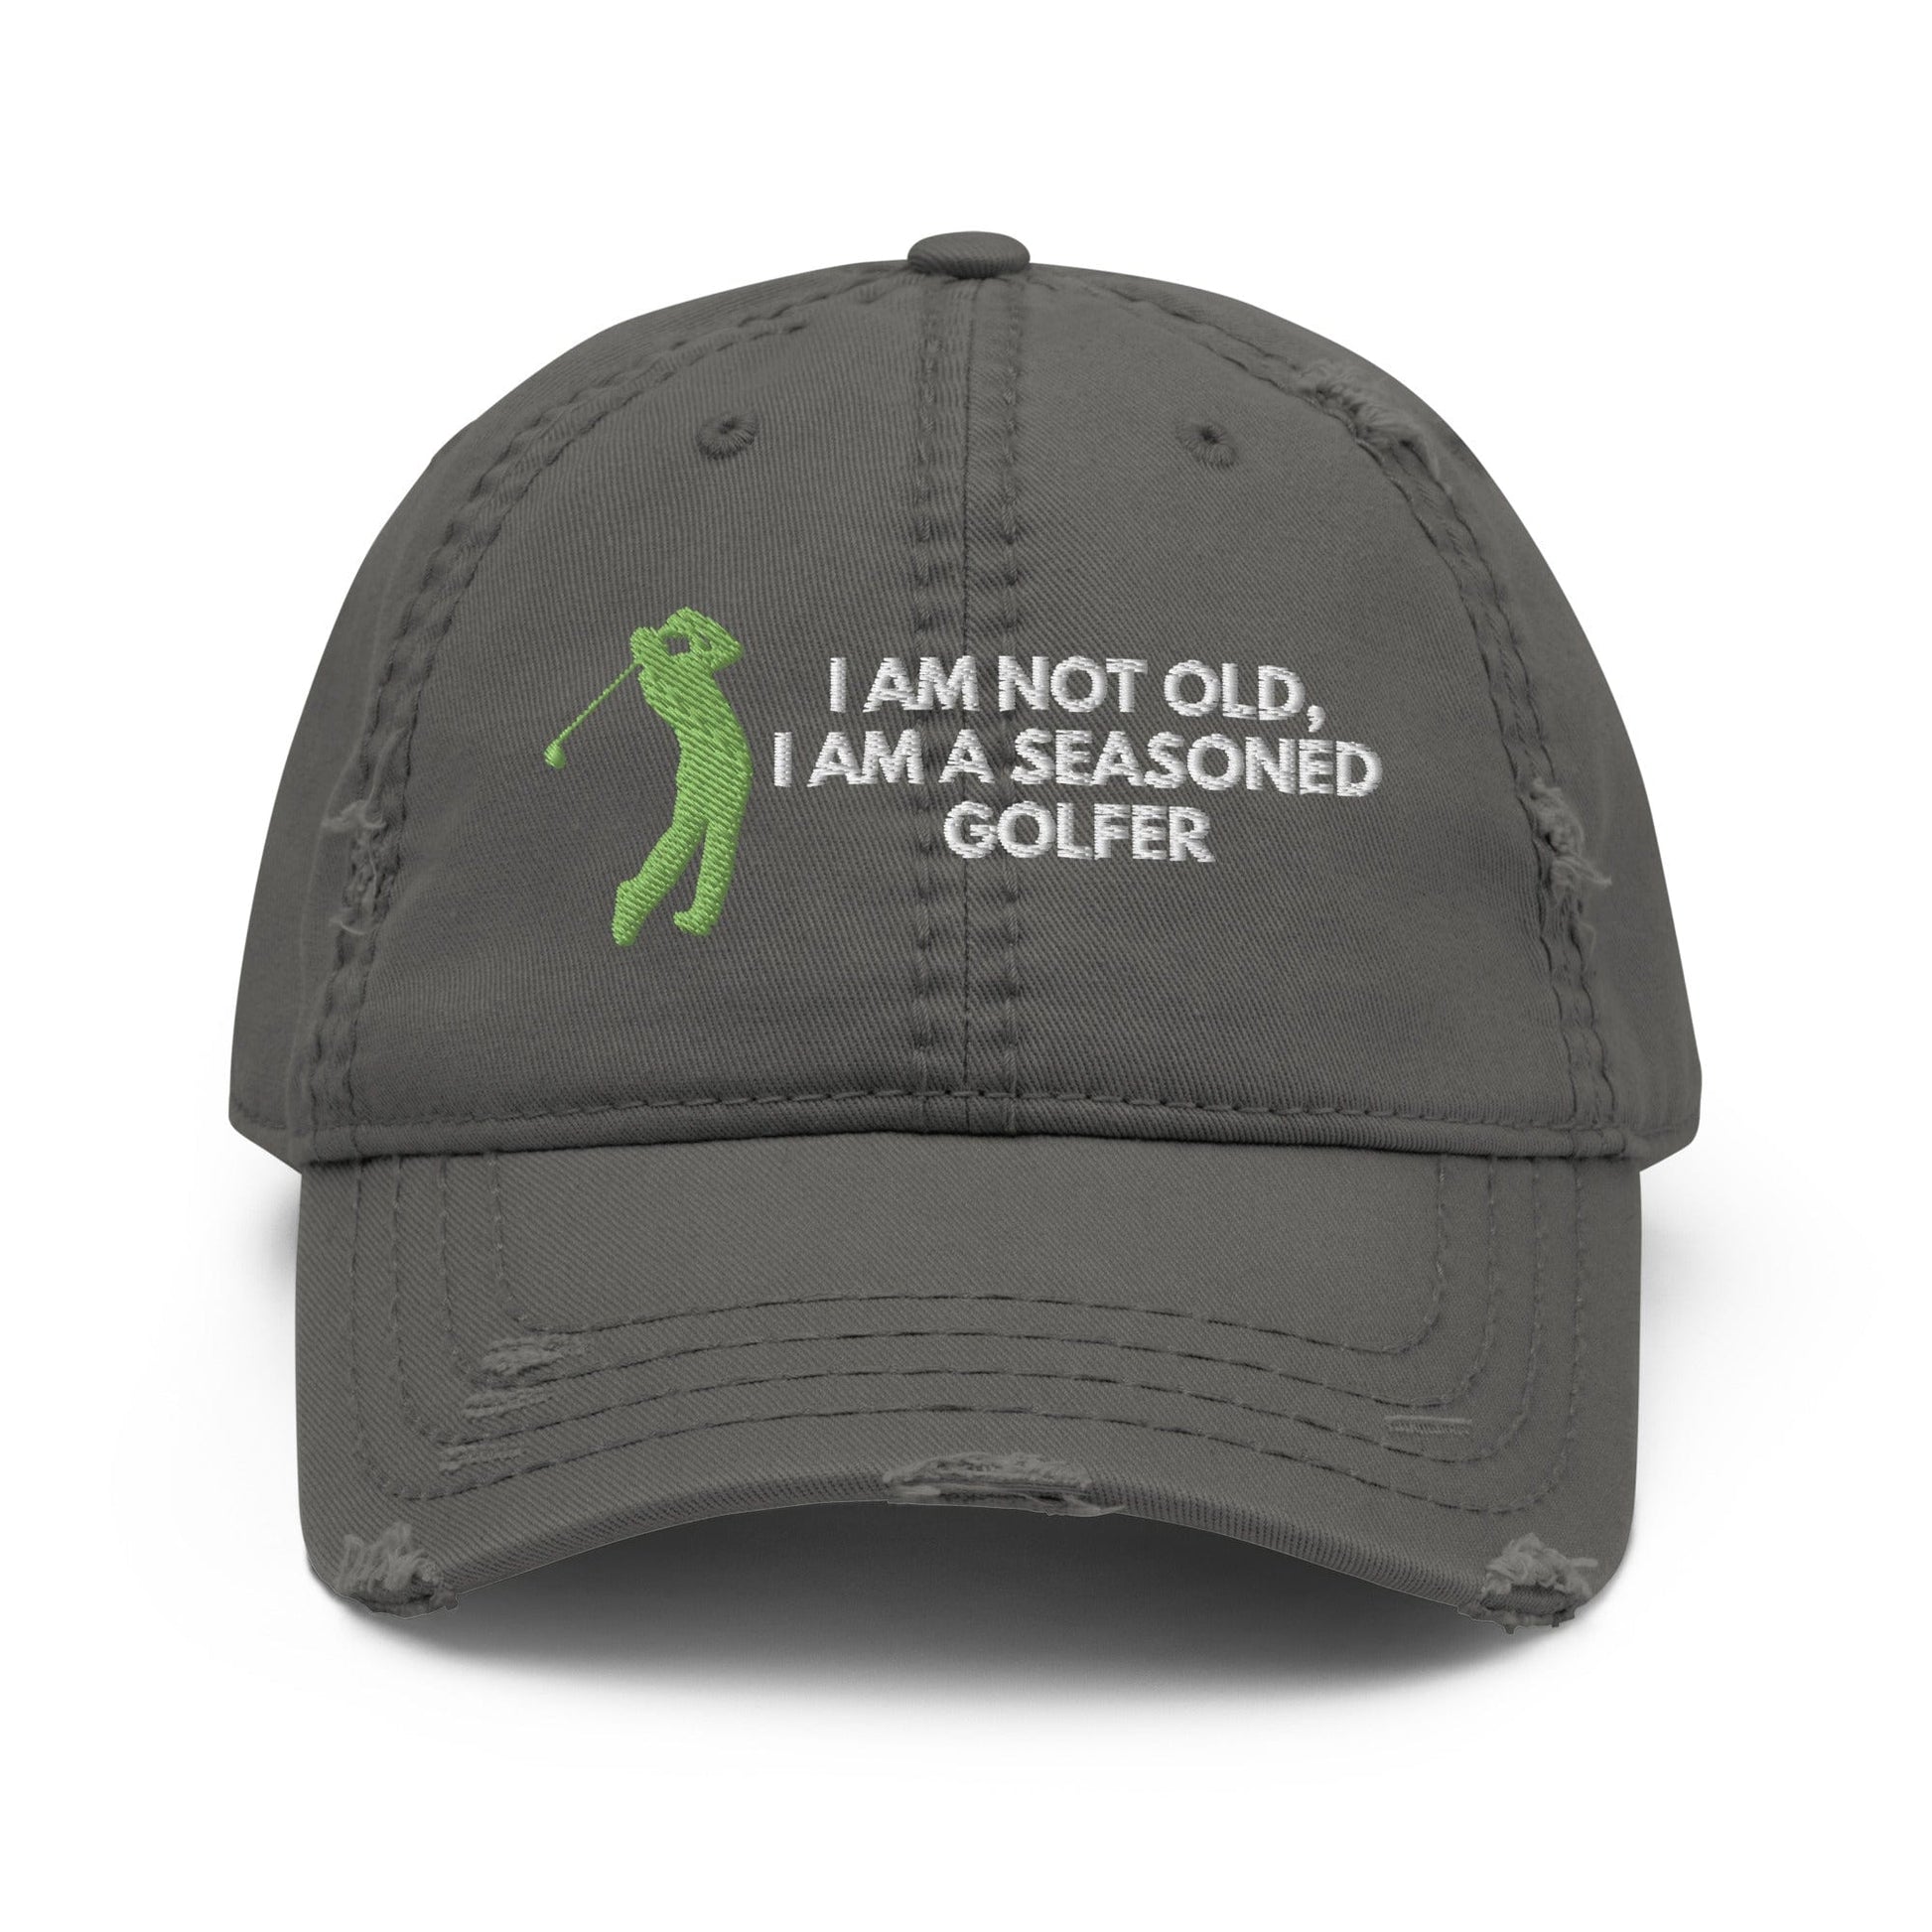 Funny Golfer Gifts  Distressed Cap Charcoal Grey Im Not Old I Am A Seasoned Golfer Hat Distressed Hat